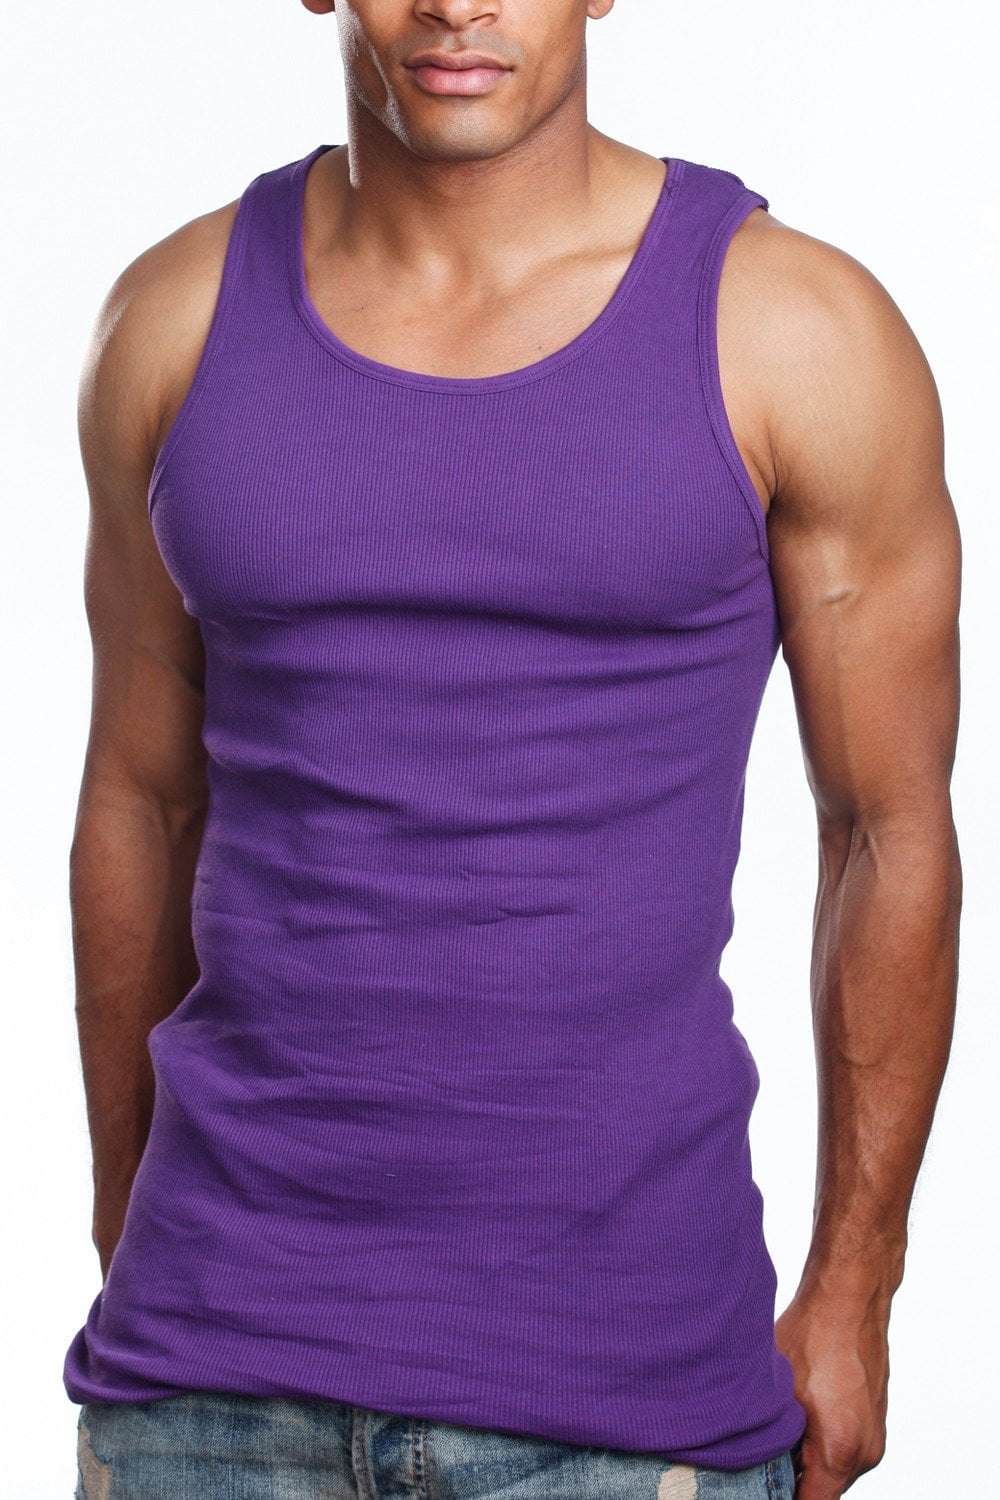 Men’s 6 Pack Tank Top A Shirt 100 Cotton Ribbed Undershirts Multicolor And Sleeveless Tees Purple